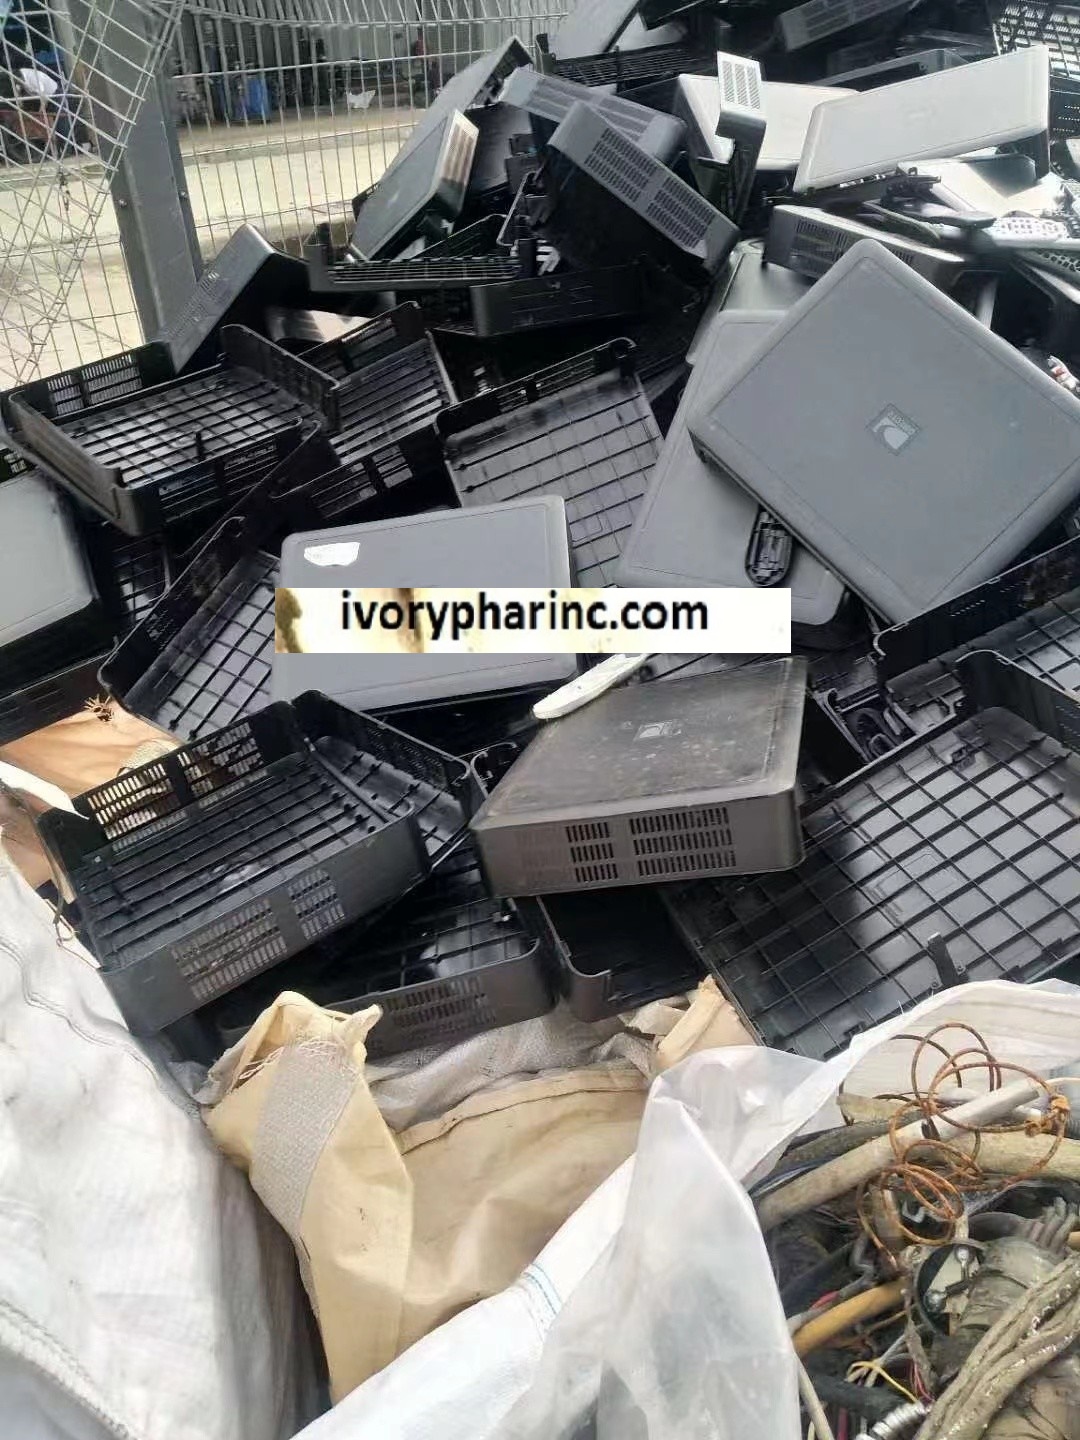 Home Products Products Acrylonitrile Butadiene Styrene (ABS) Scrap Regrind for Sale, Bales, Regrind, Granules Acrylonitrile Butadiene Styrene (ABS) Scrap Regrind for Sale, Bales, Regrind, Granules